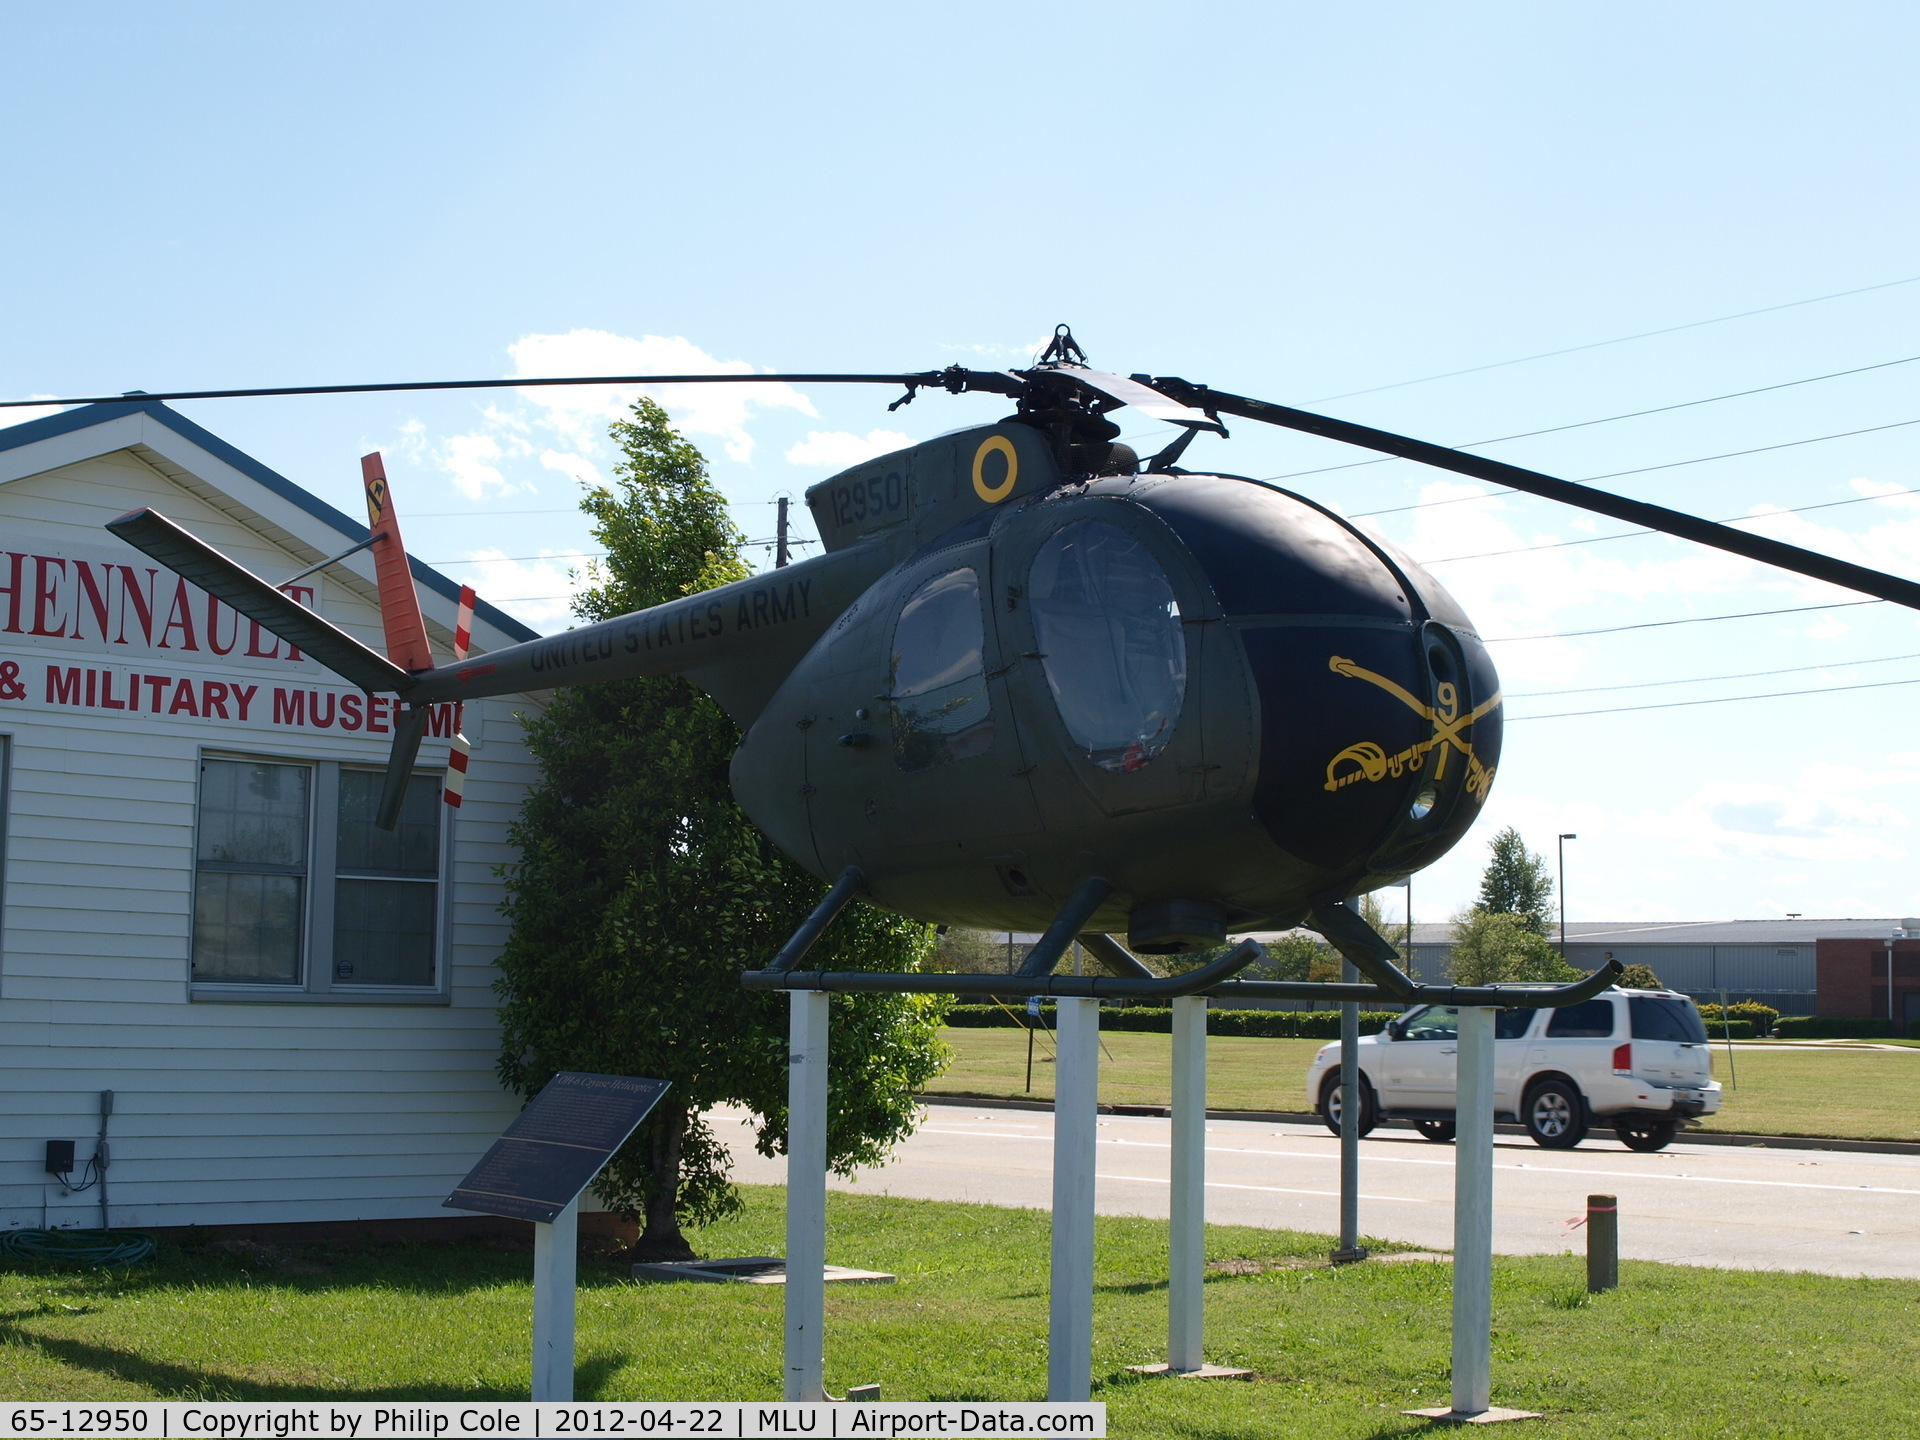 65-12950, 1965 Hughes OH-6A Cayuse C/N 0035, Chennault Aviation and Military Museum